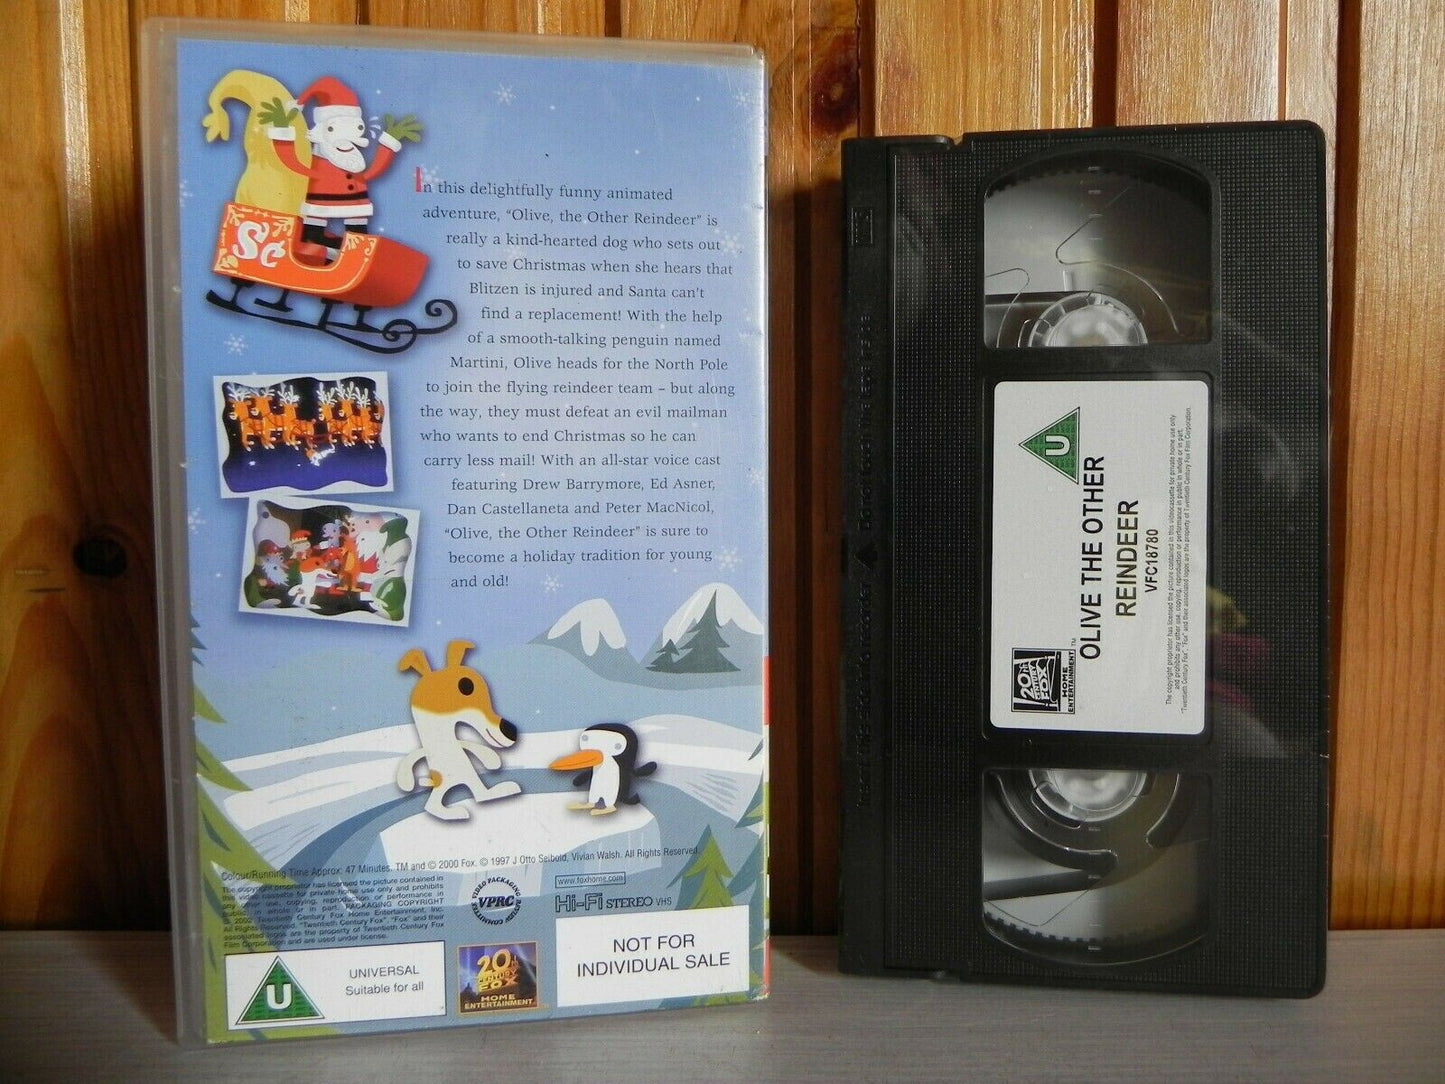 Olive: The Other Reindeer - Children's Christmas Adventure - Festive Video - VHS-